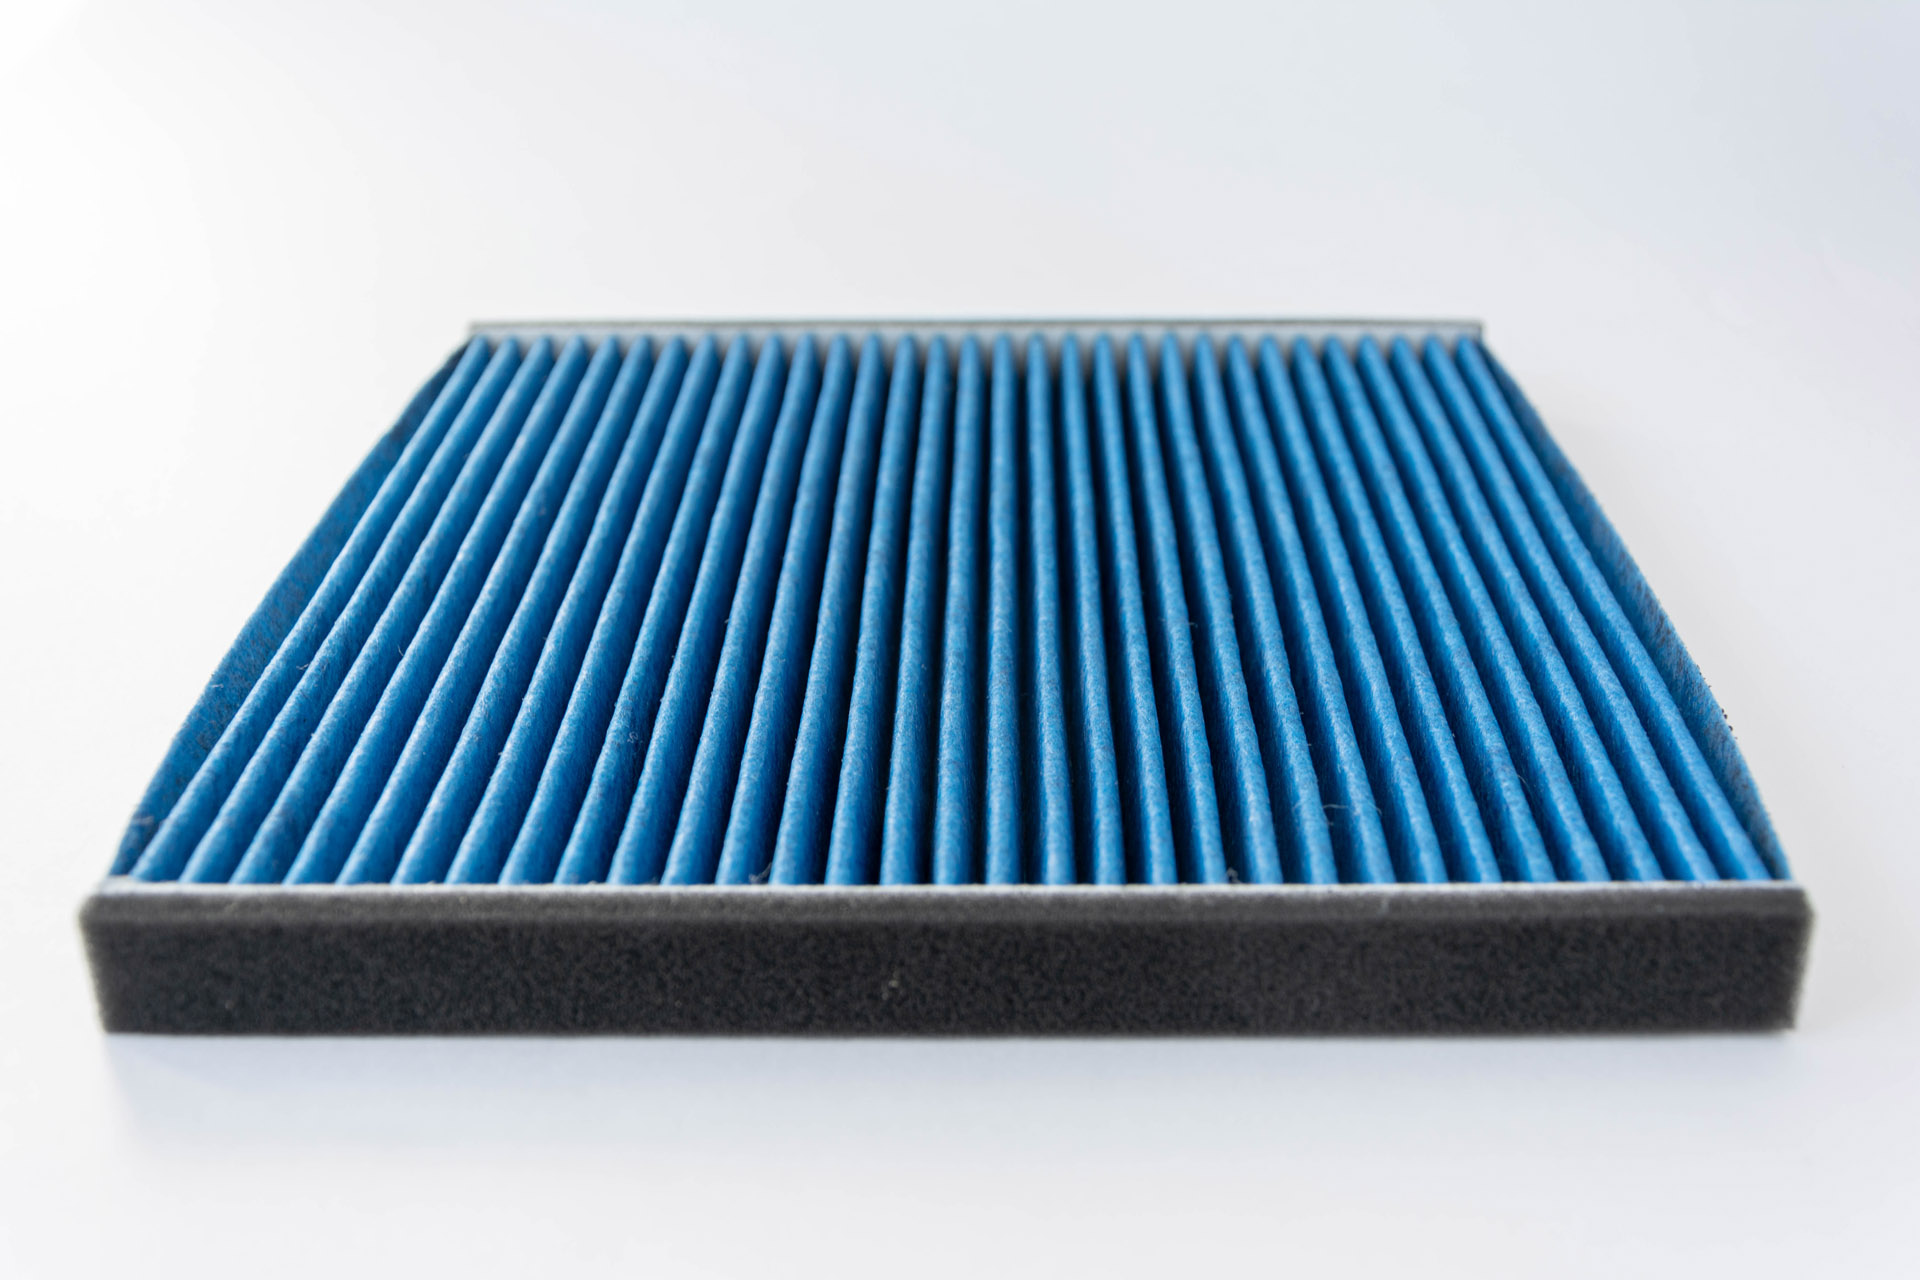 Cabin filter with silver ions. New product on PURRO’s offer